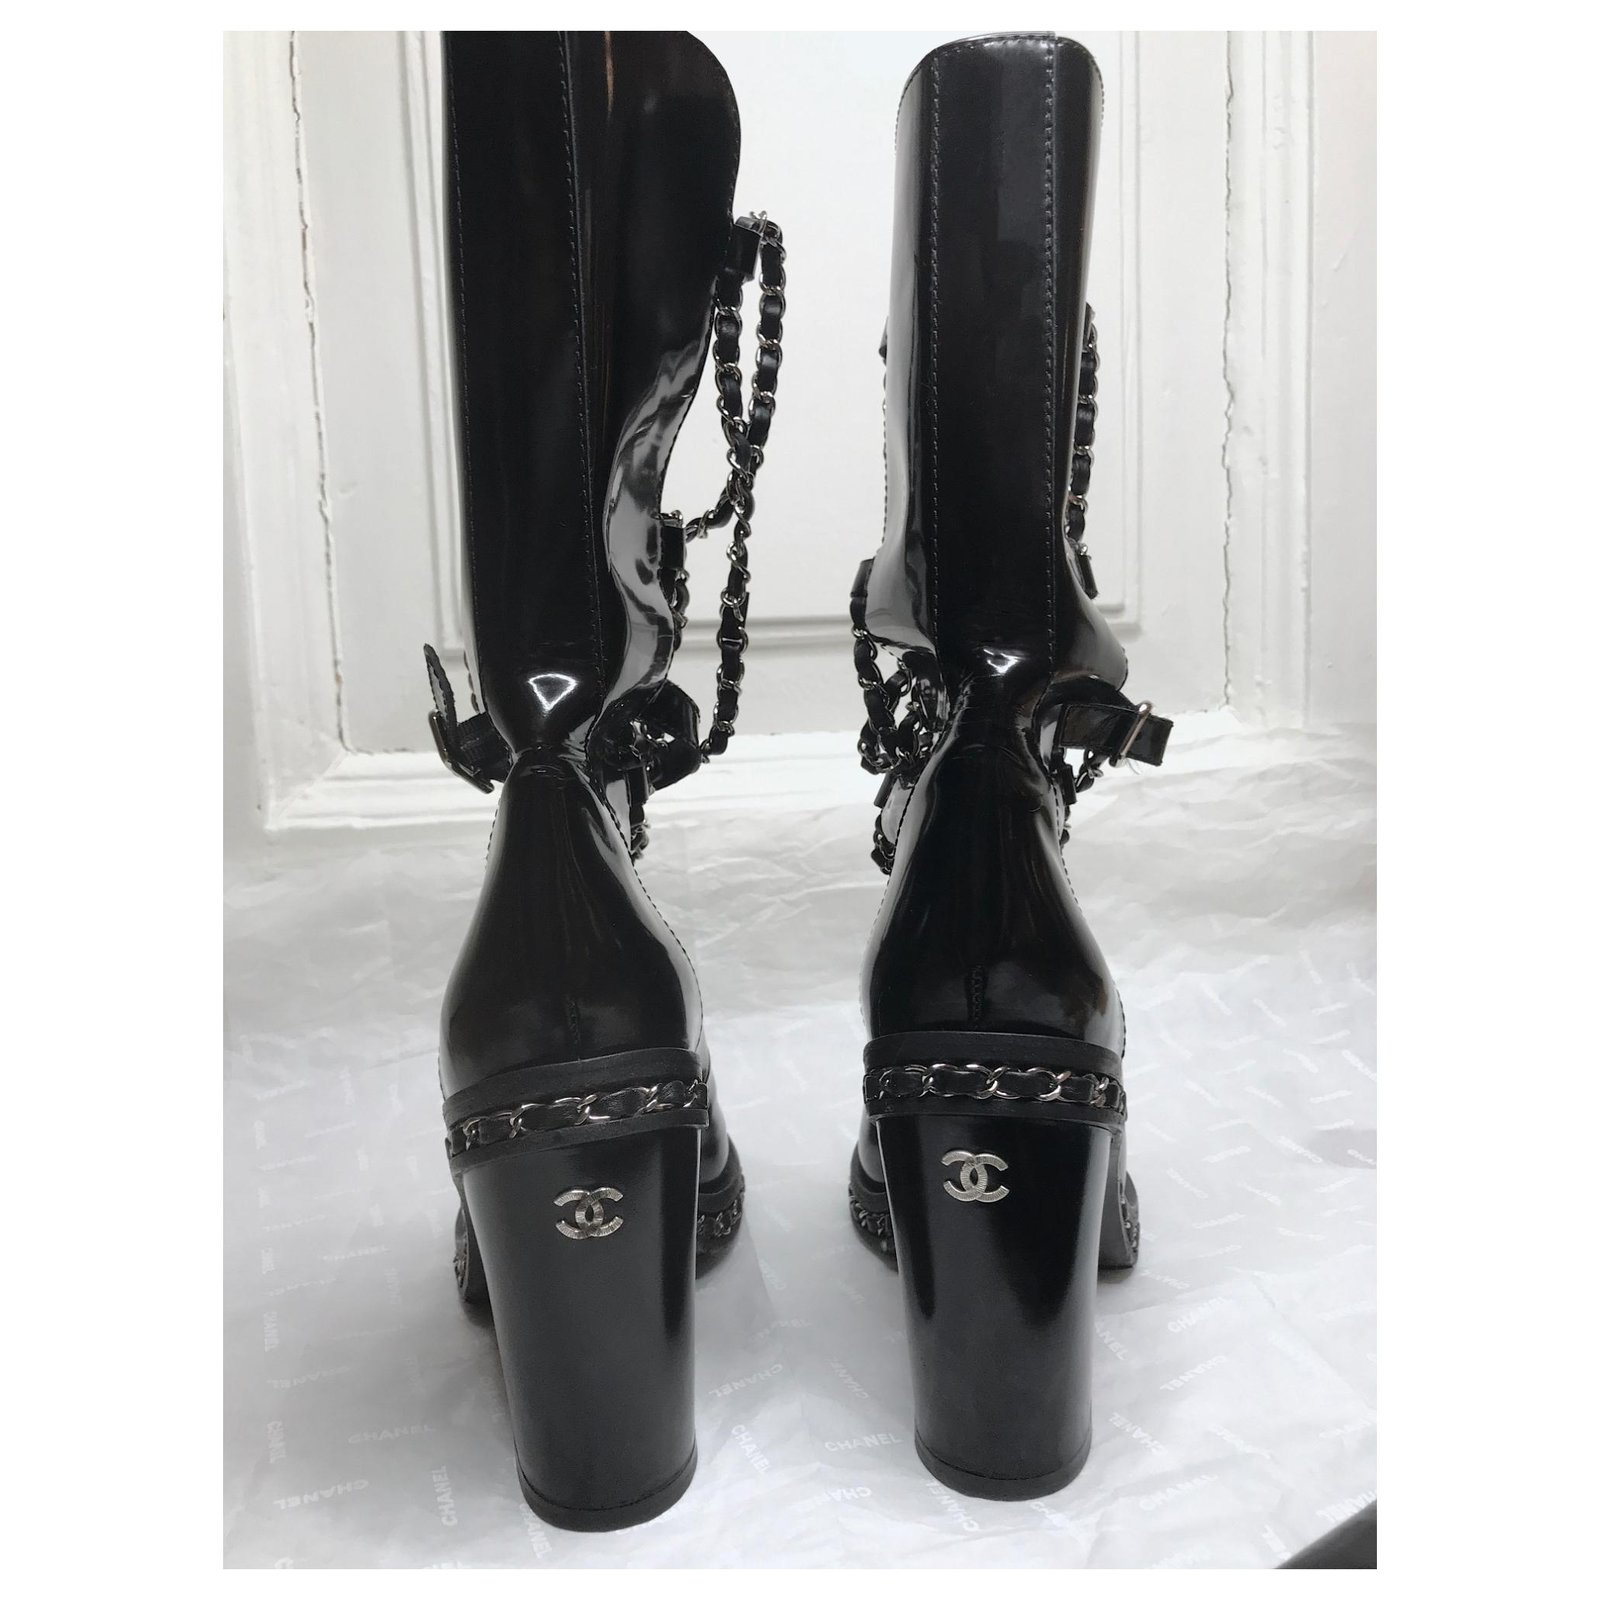 Chanel Chain Boots w/ Gaiter Leggings Black Patent leather ref